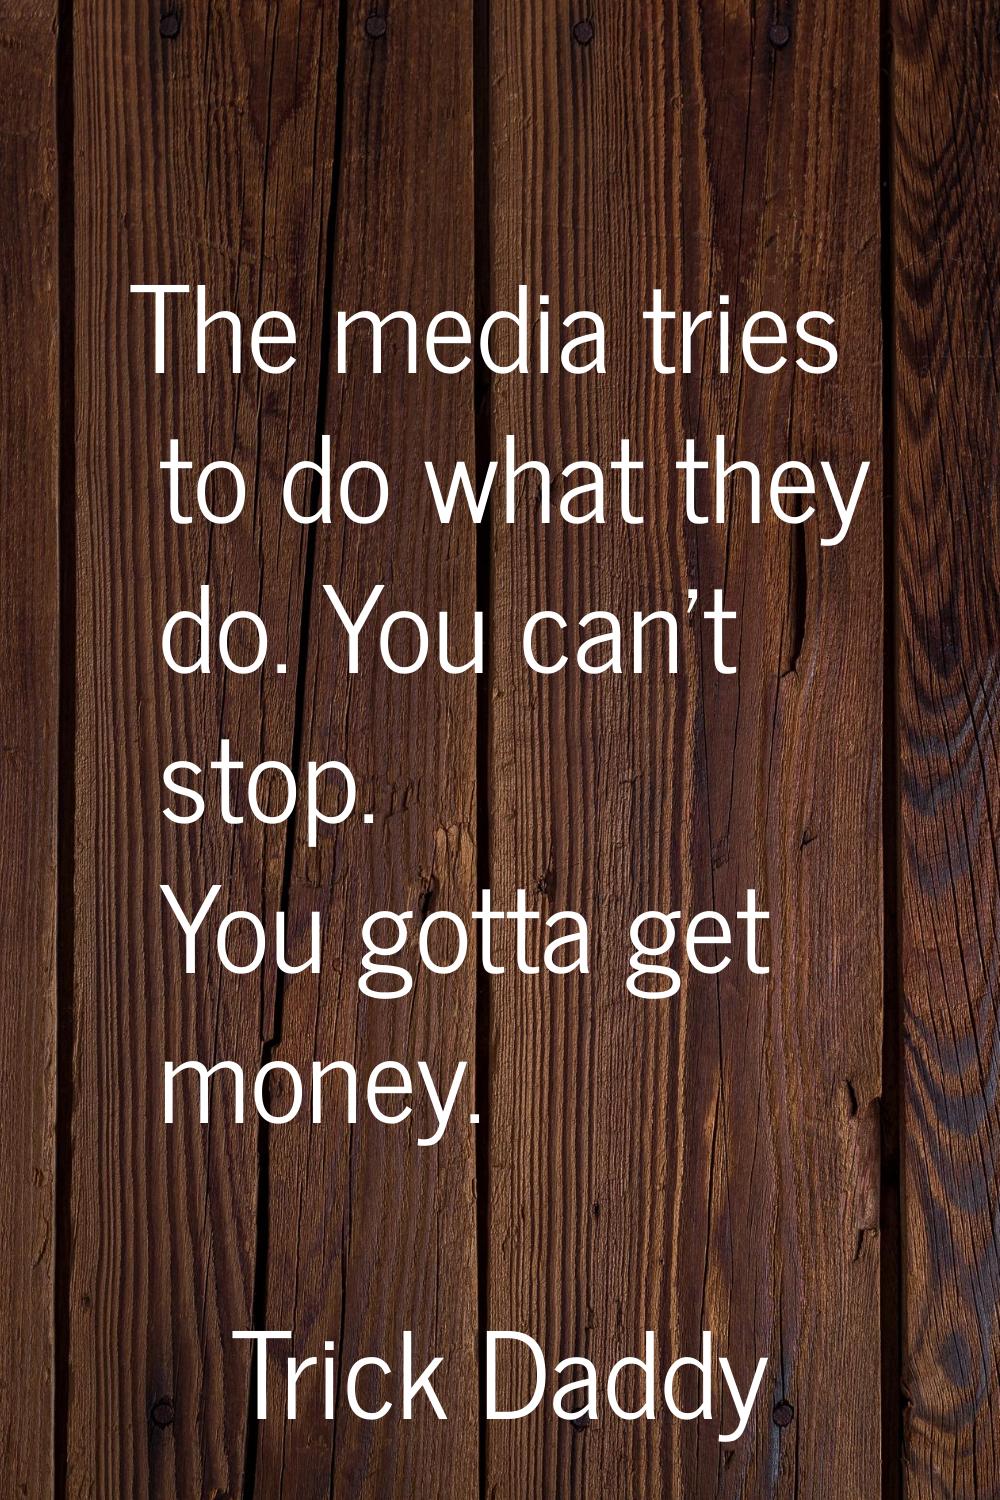 The media tries to do what they do. You can't stop. You gotta get money.